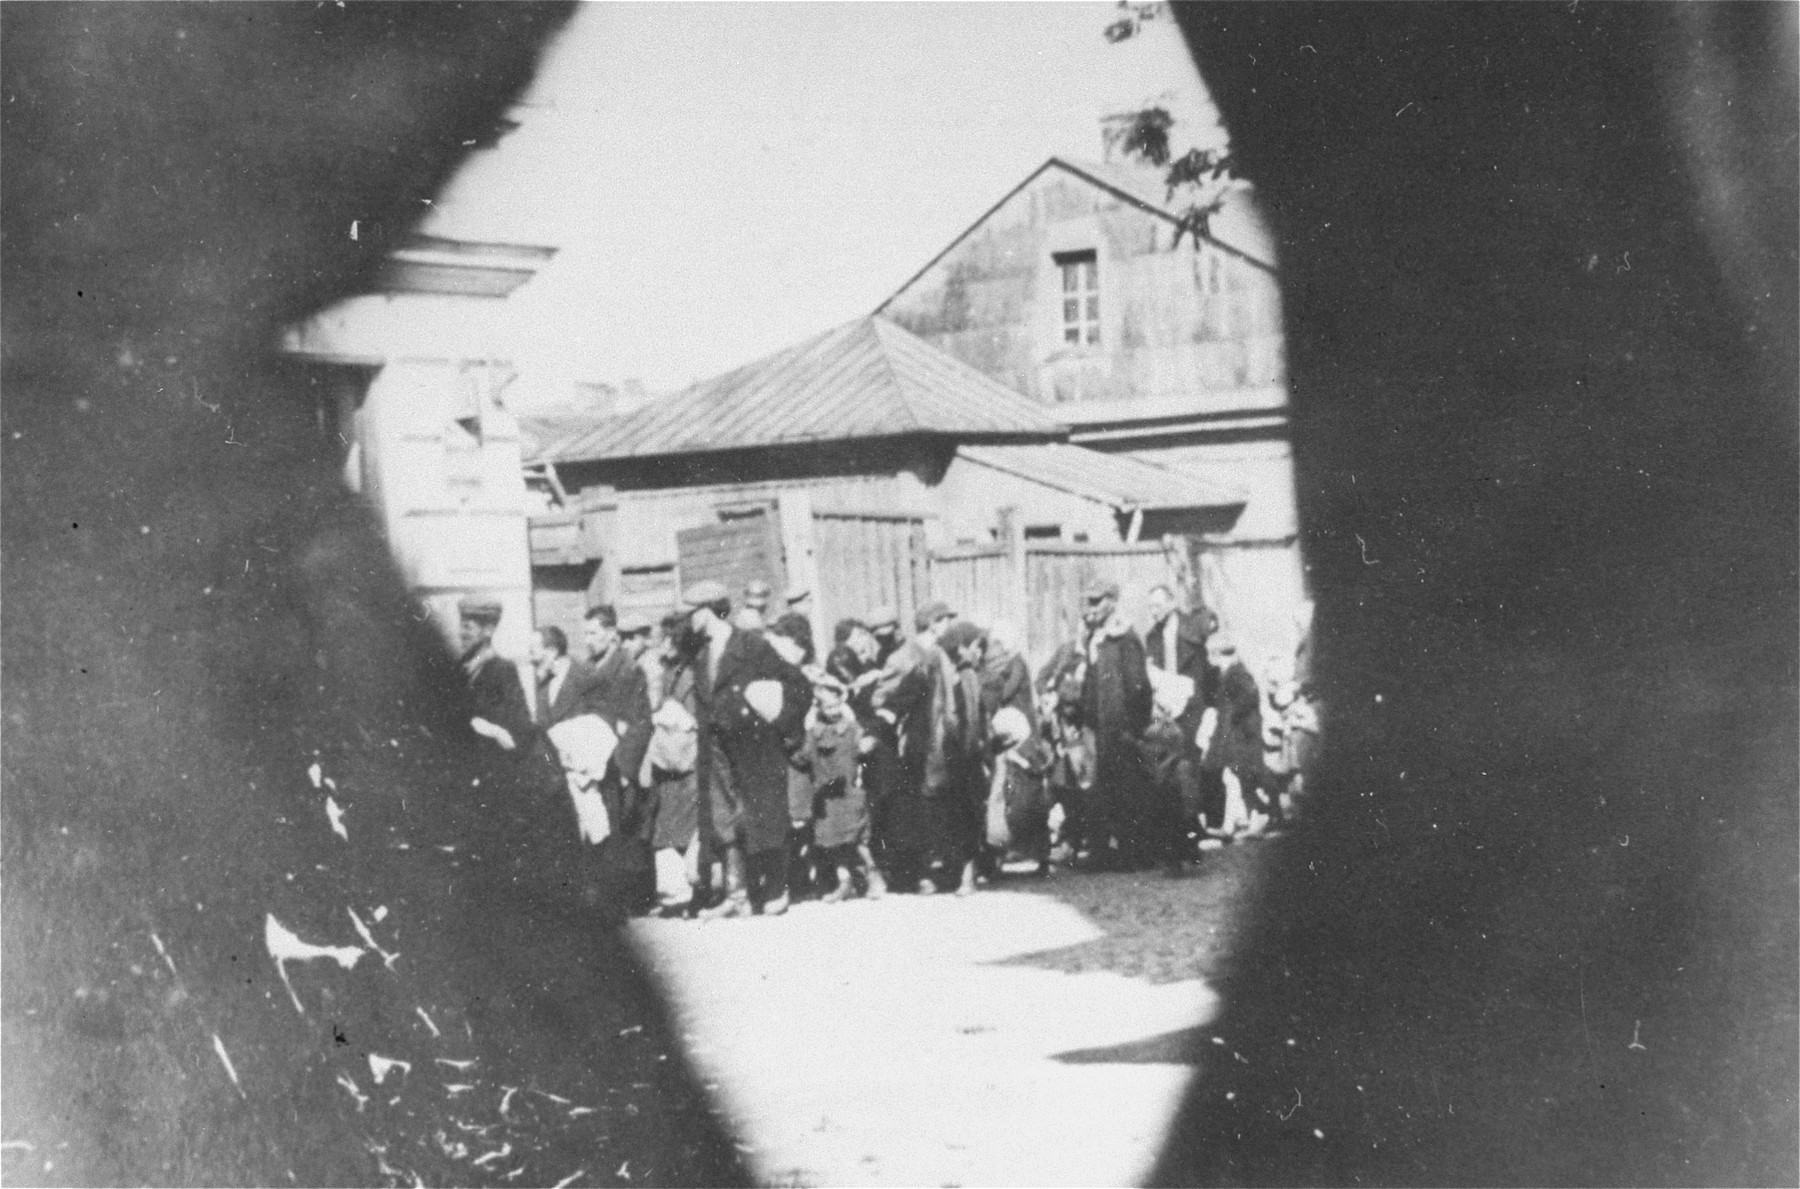 Jews are led through the streets of the town on their way to the railroad station during a deportation action from the Siedlce ghetto.

One of a series of clandestine photographs taken by a member of the AK (Polish Home Army) underground.